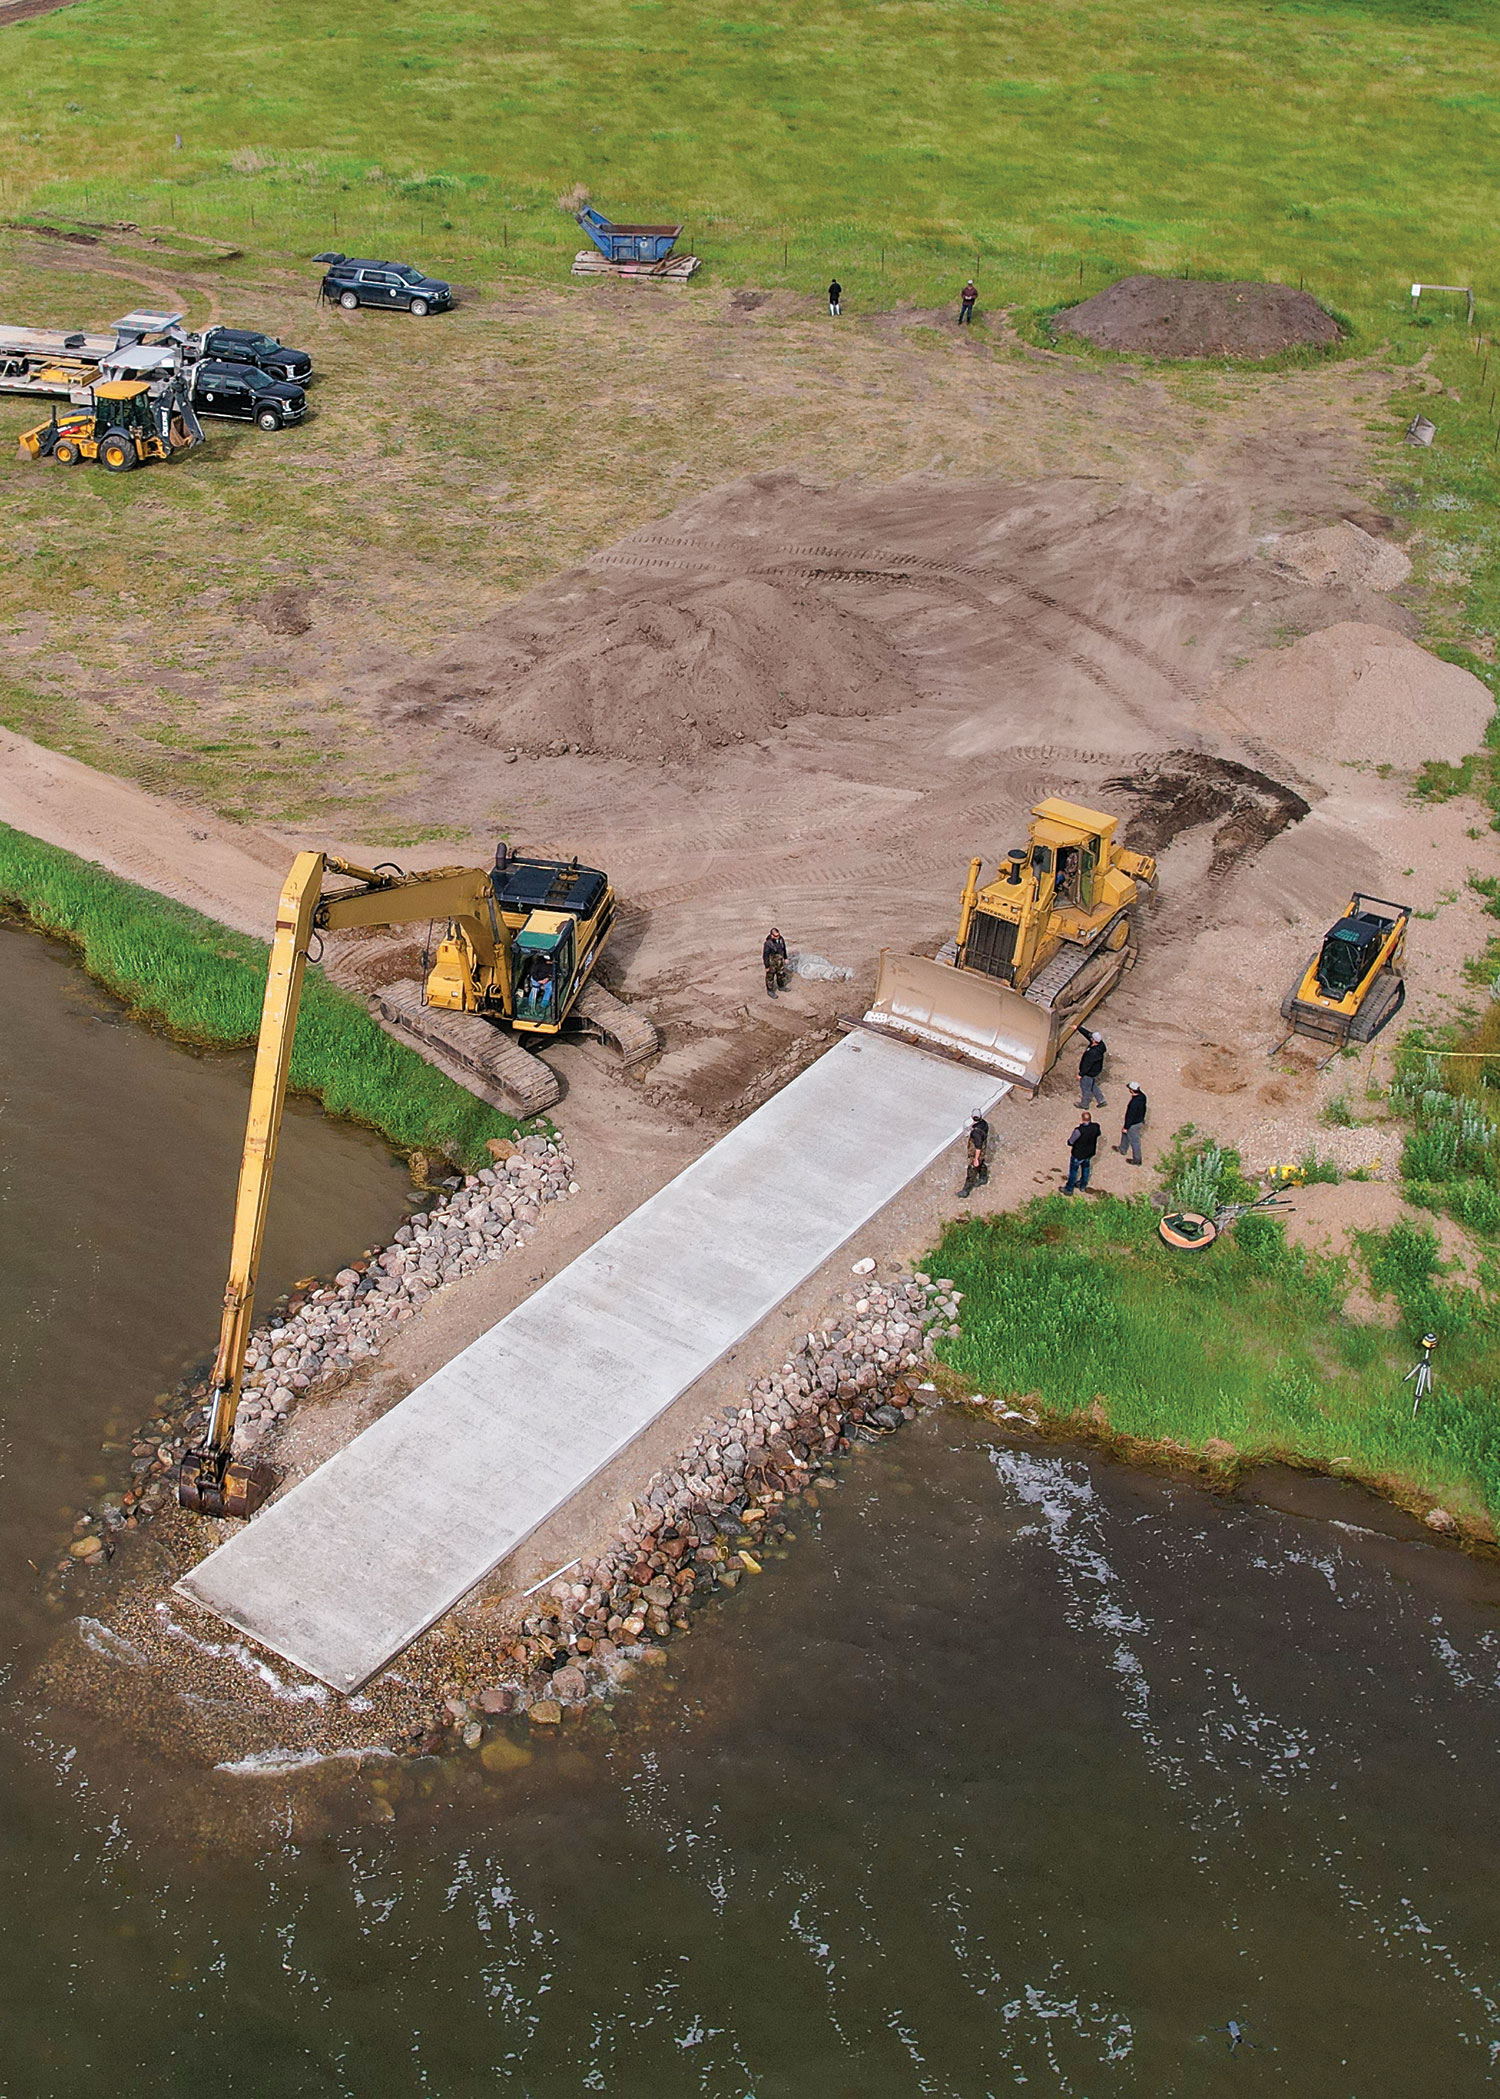 Large machinery working on ramp seen from drone